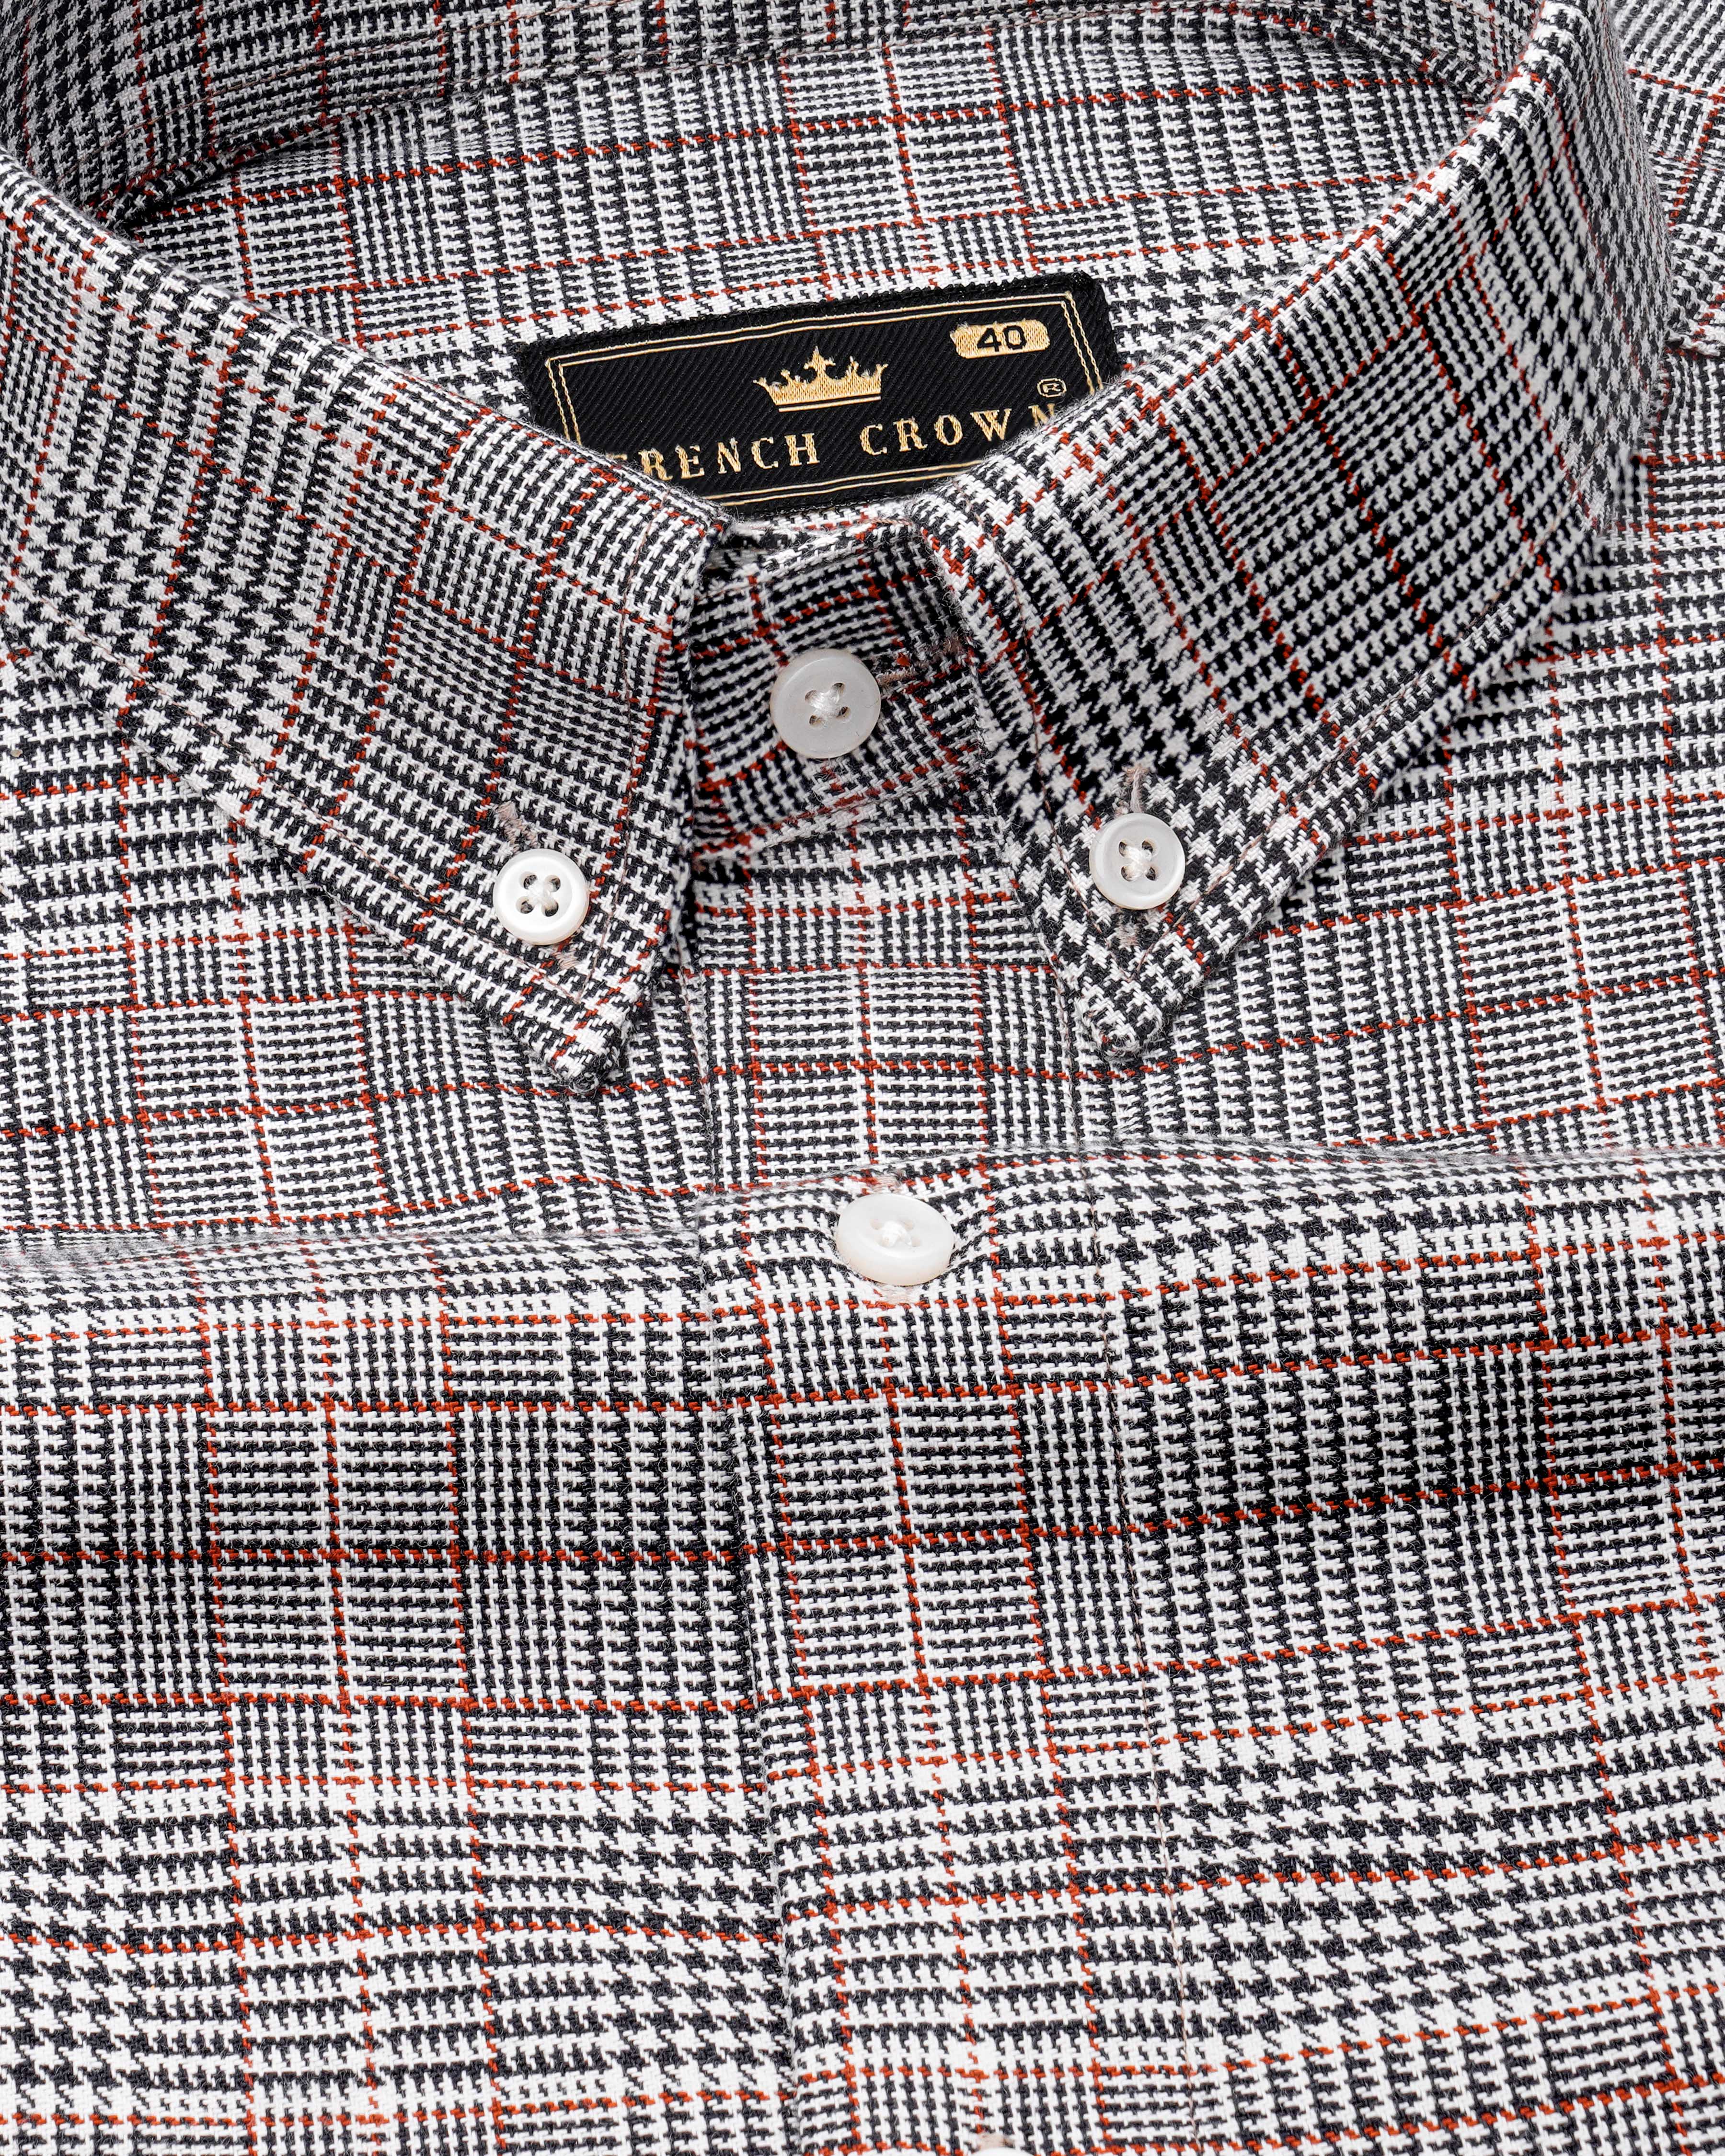 Bright White with Jade Black Plaid Houndstooth Shirt 8488-BD-38,8488-BD-H-38,8488-BD-39,8488-BD-H-39,8488-BD-40,8488-BD-H-40,8488-BD-42,8488-BD-H-42,8488-BD-44,8488-BD-H-44,8488-BD-46,8488-BD-H-46,8488-BD-48,8488-BD-H-48,8488-BD-50,8488-BD-H-50,8488-BD-52,8488-BD-H-52